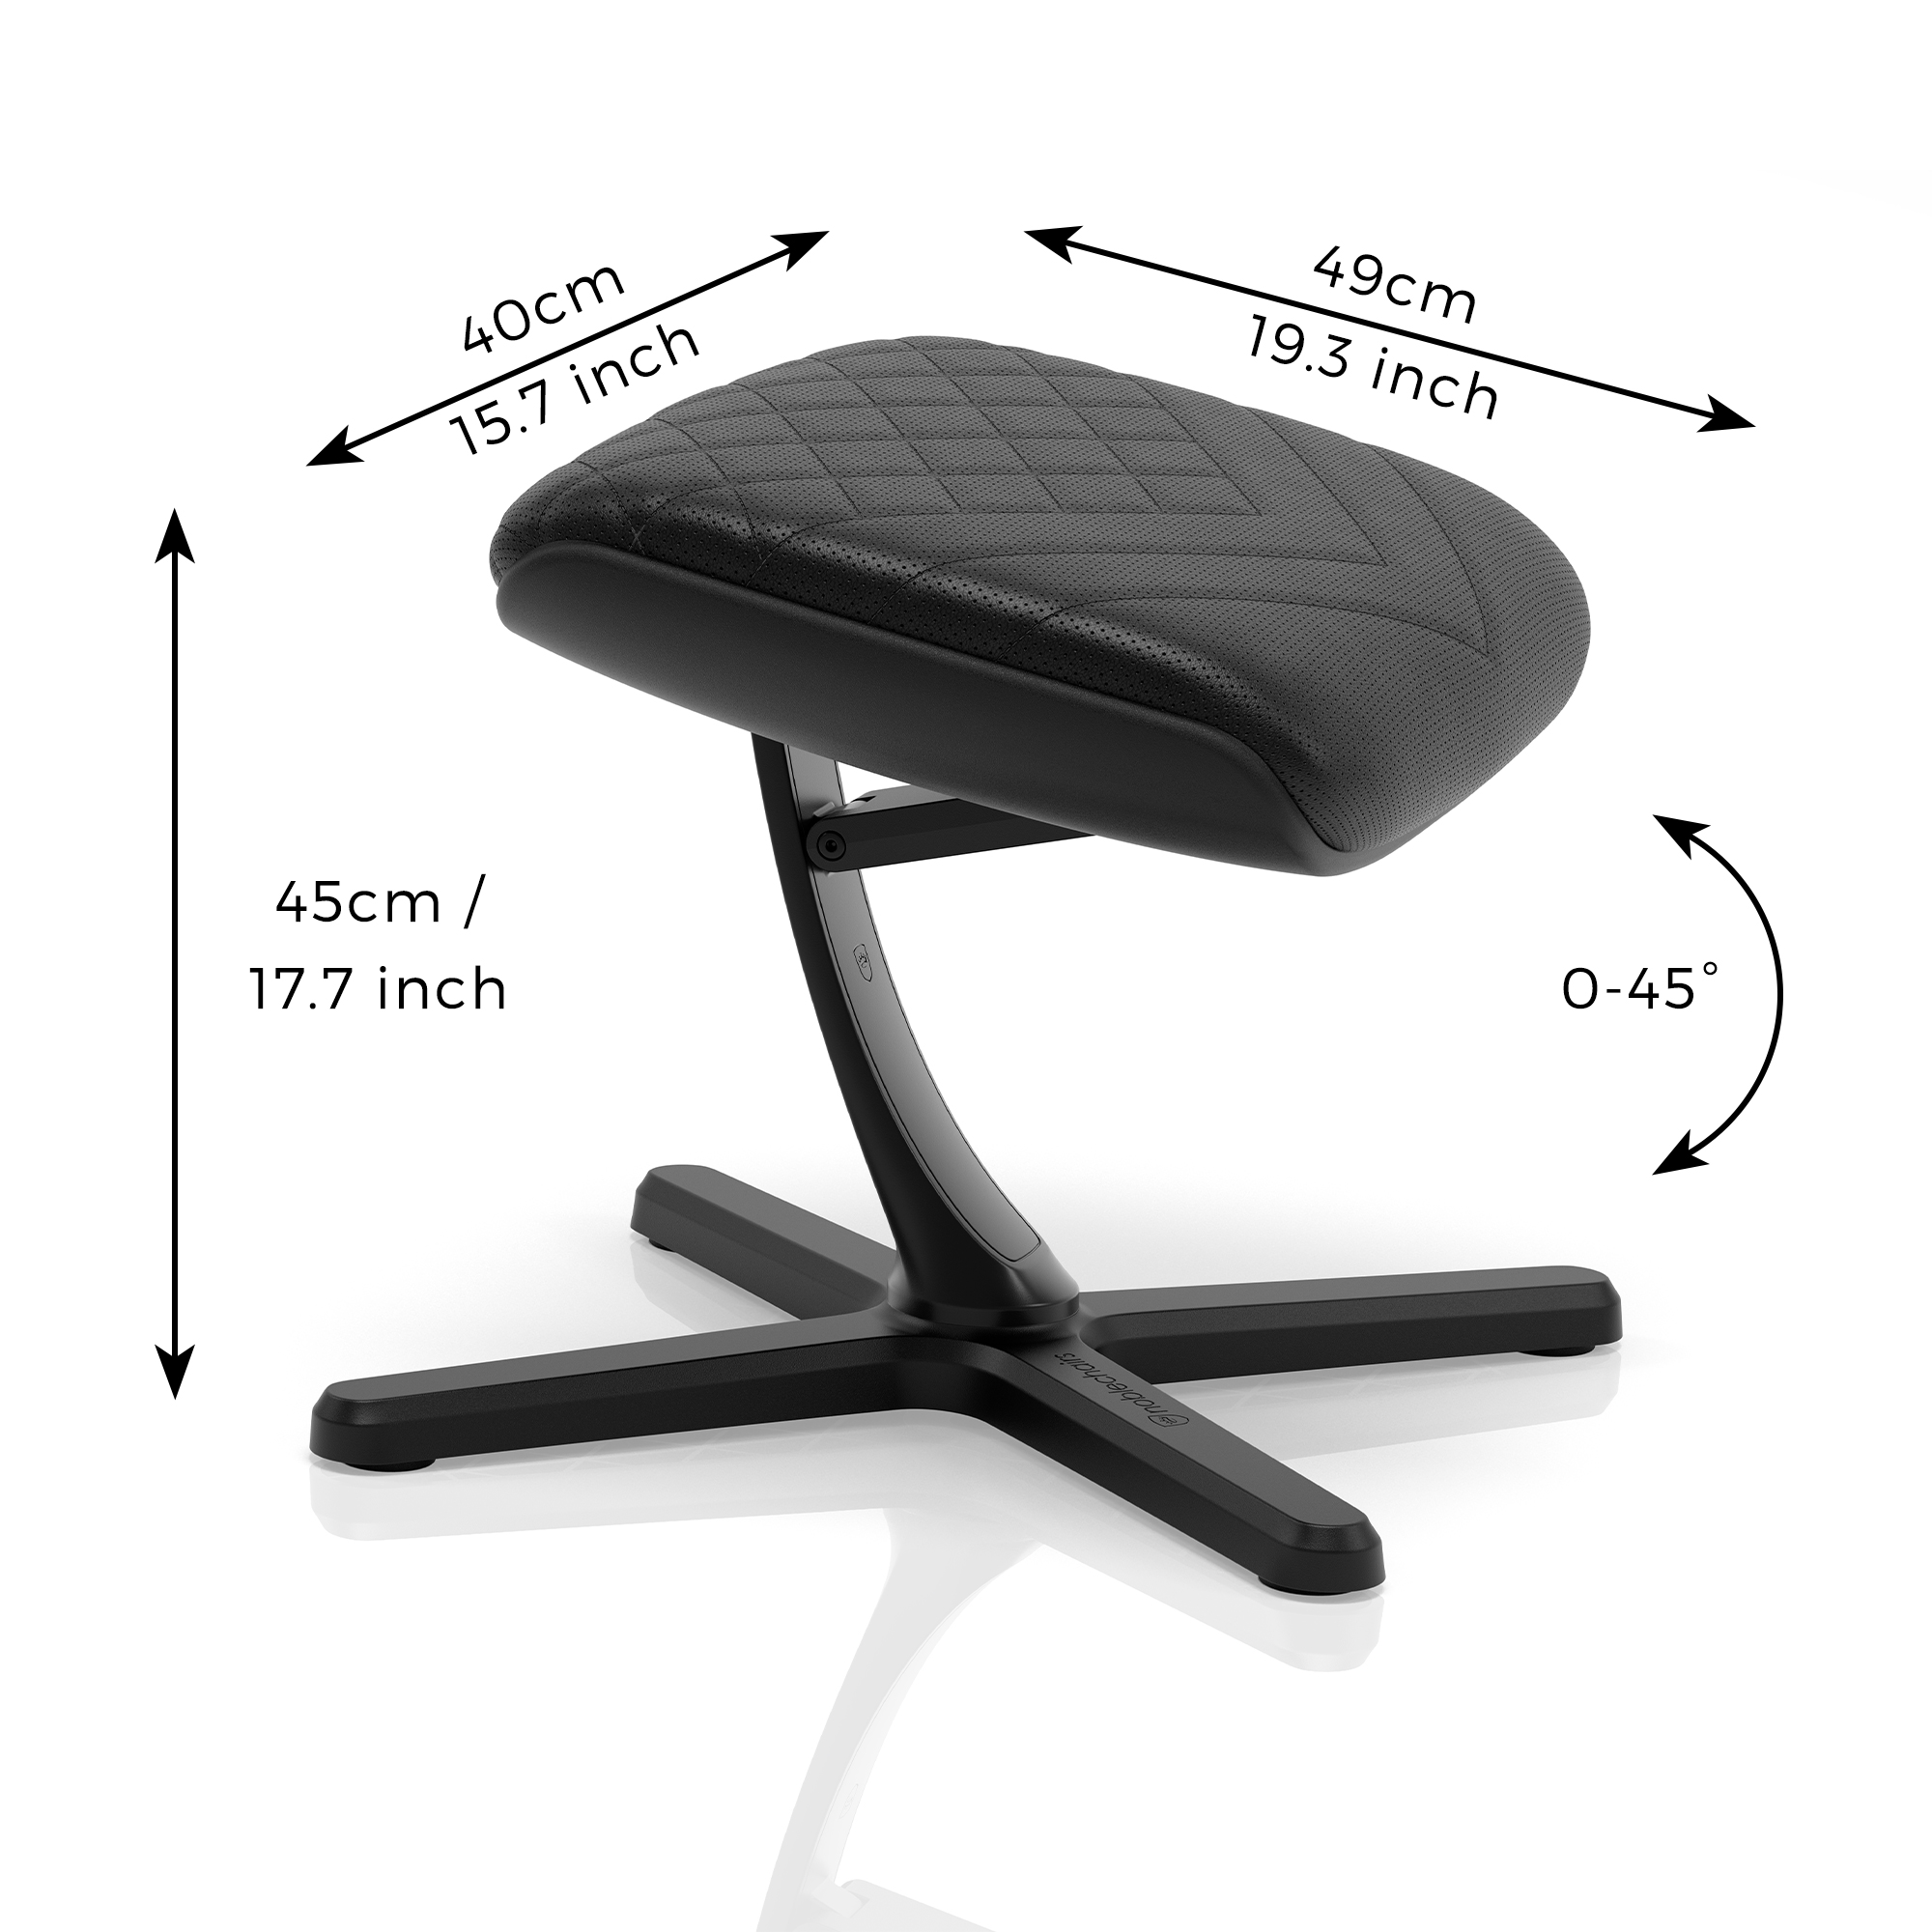 noblechairs - noblechairs Footrest 2 PU Edition Black